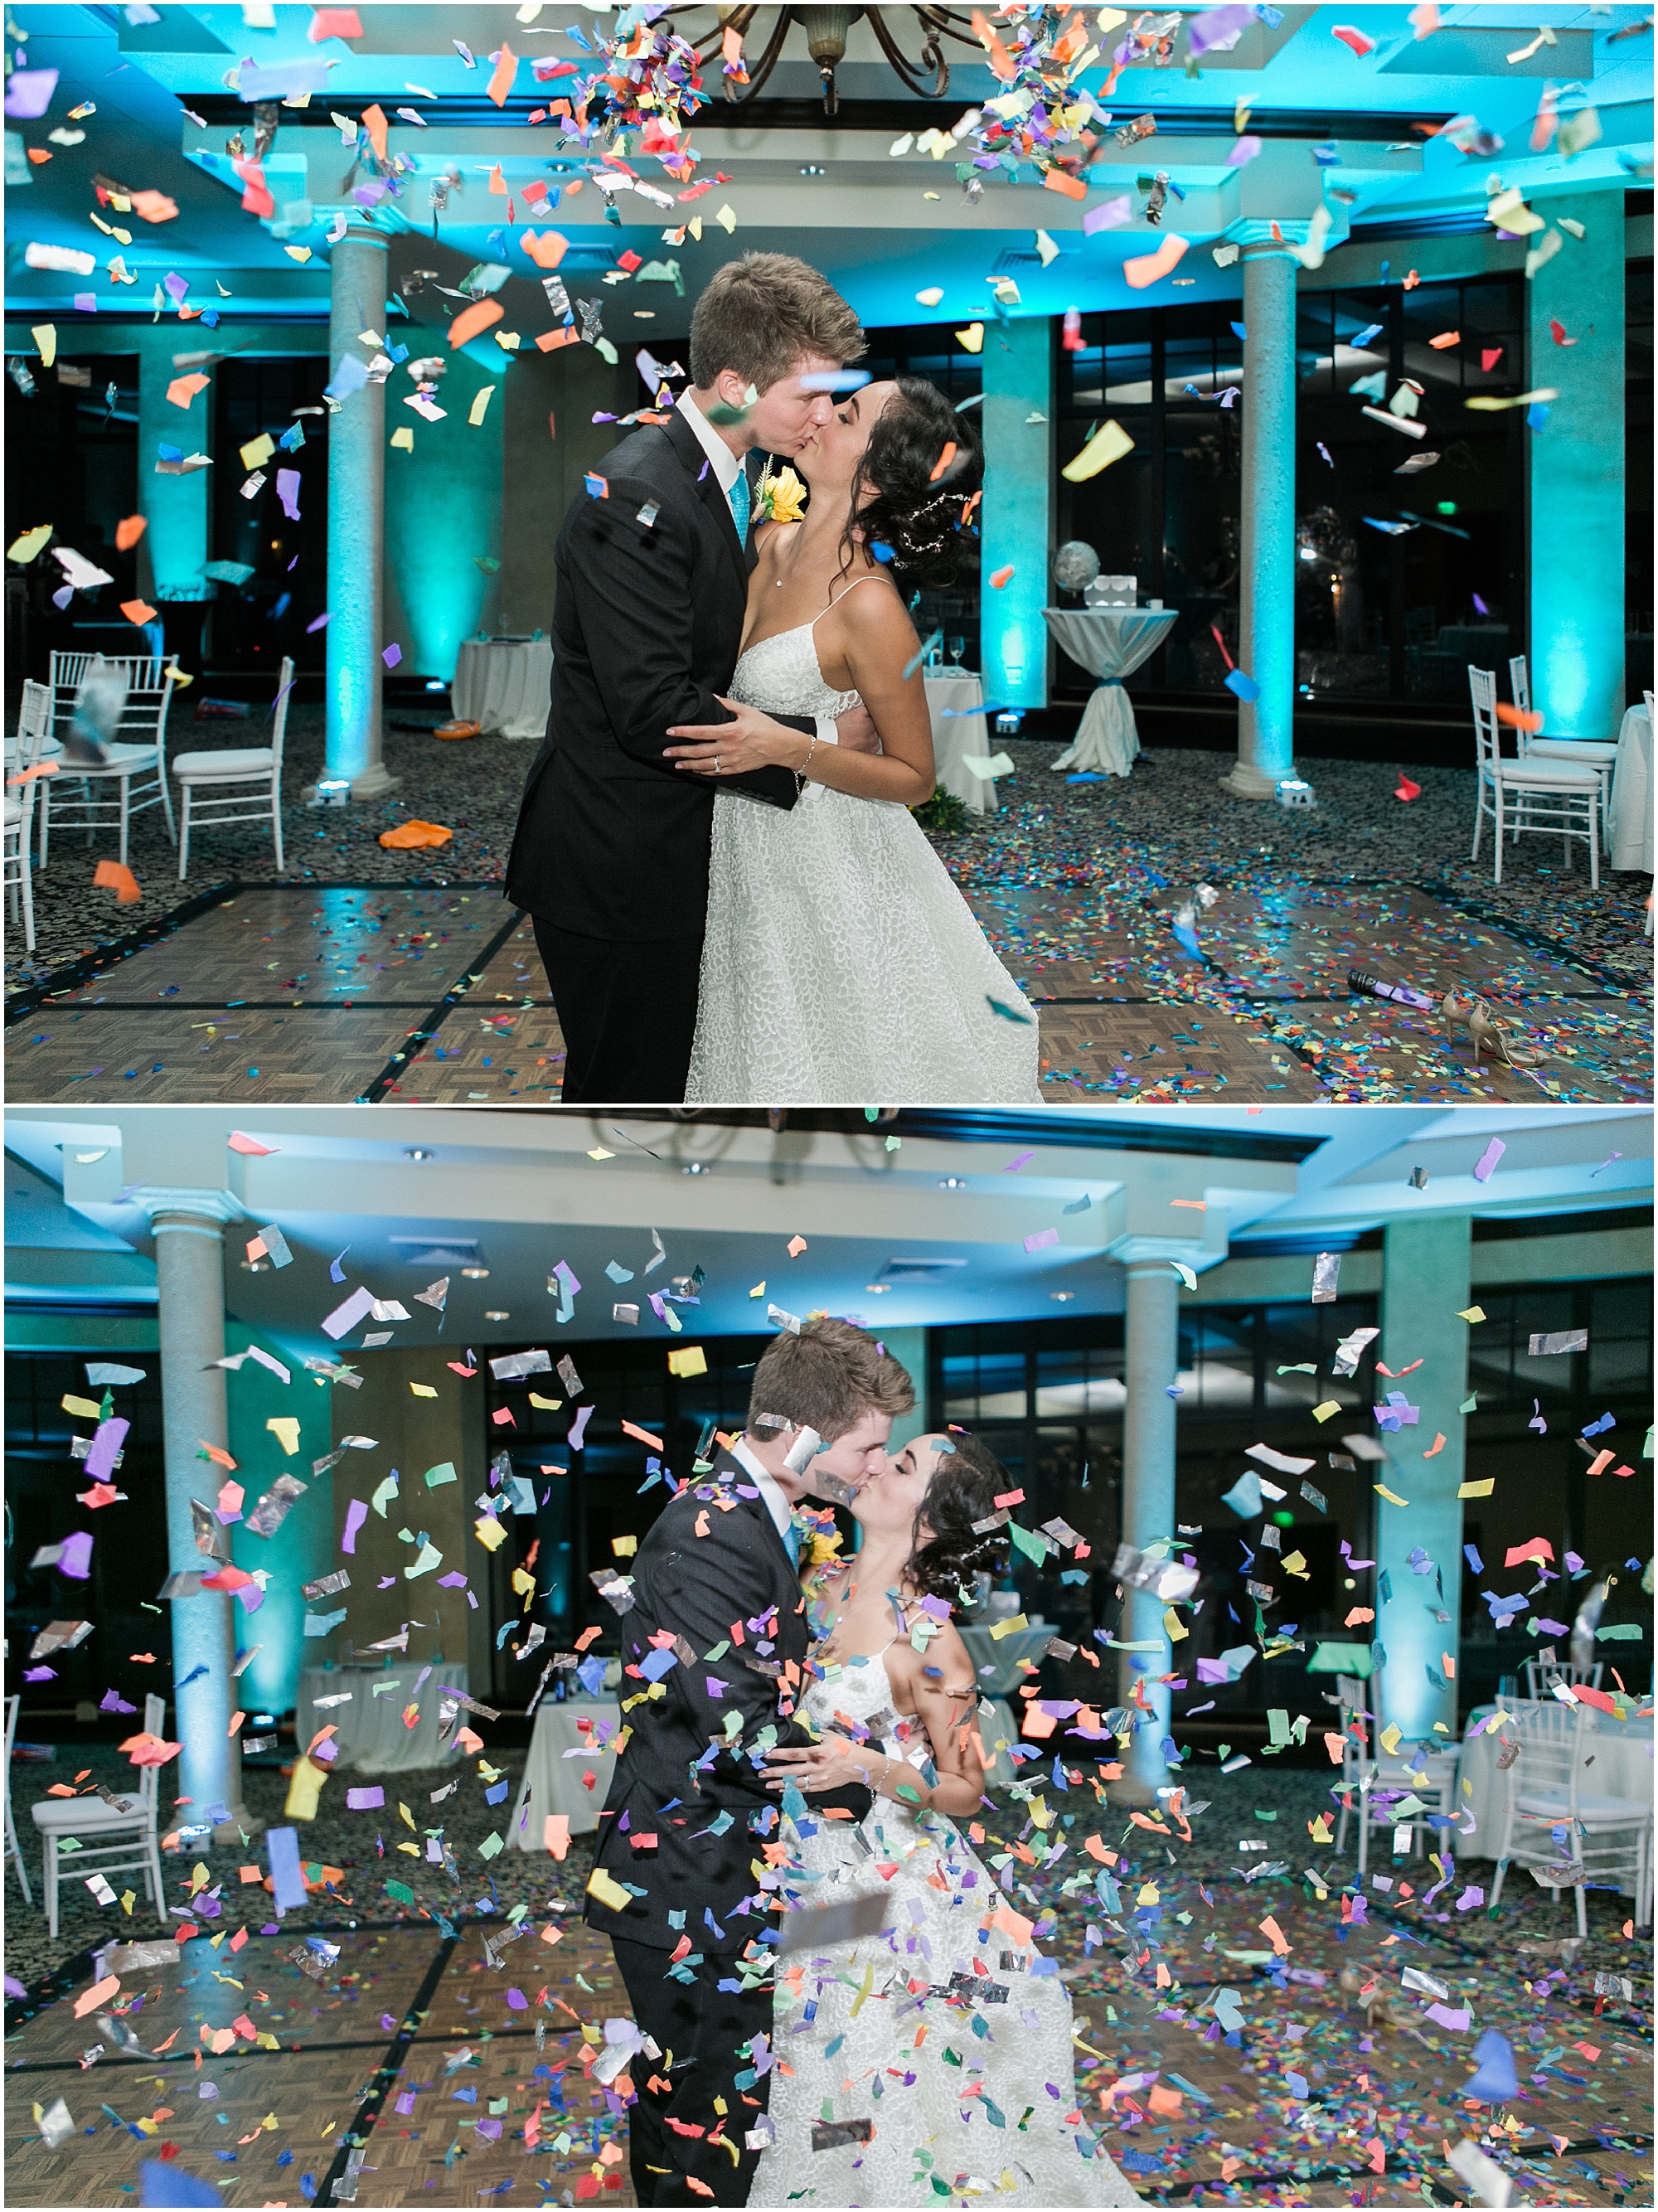 Bride and groom kissing while confetti rains down on them.